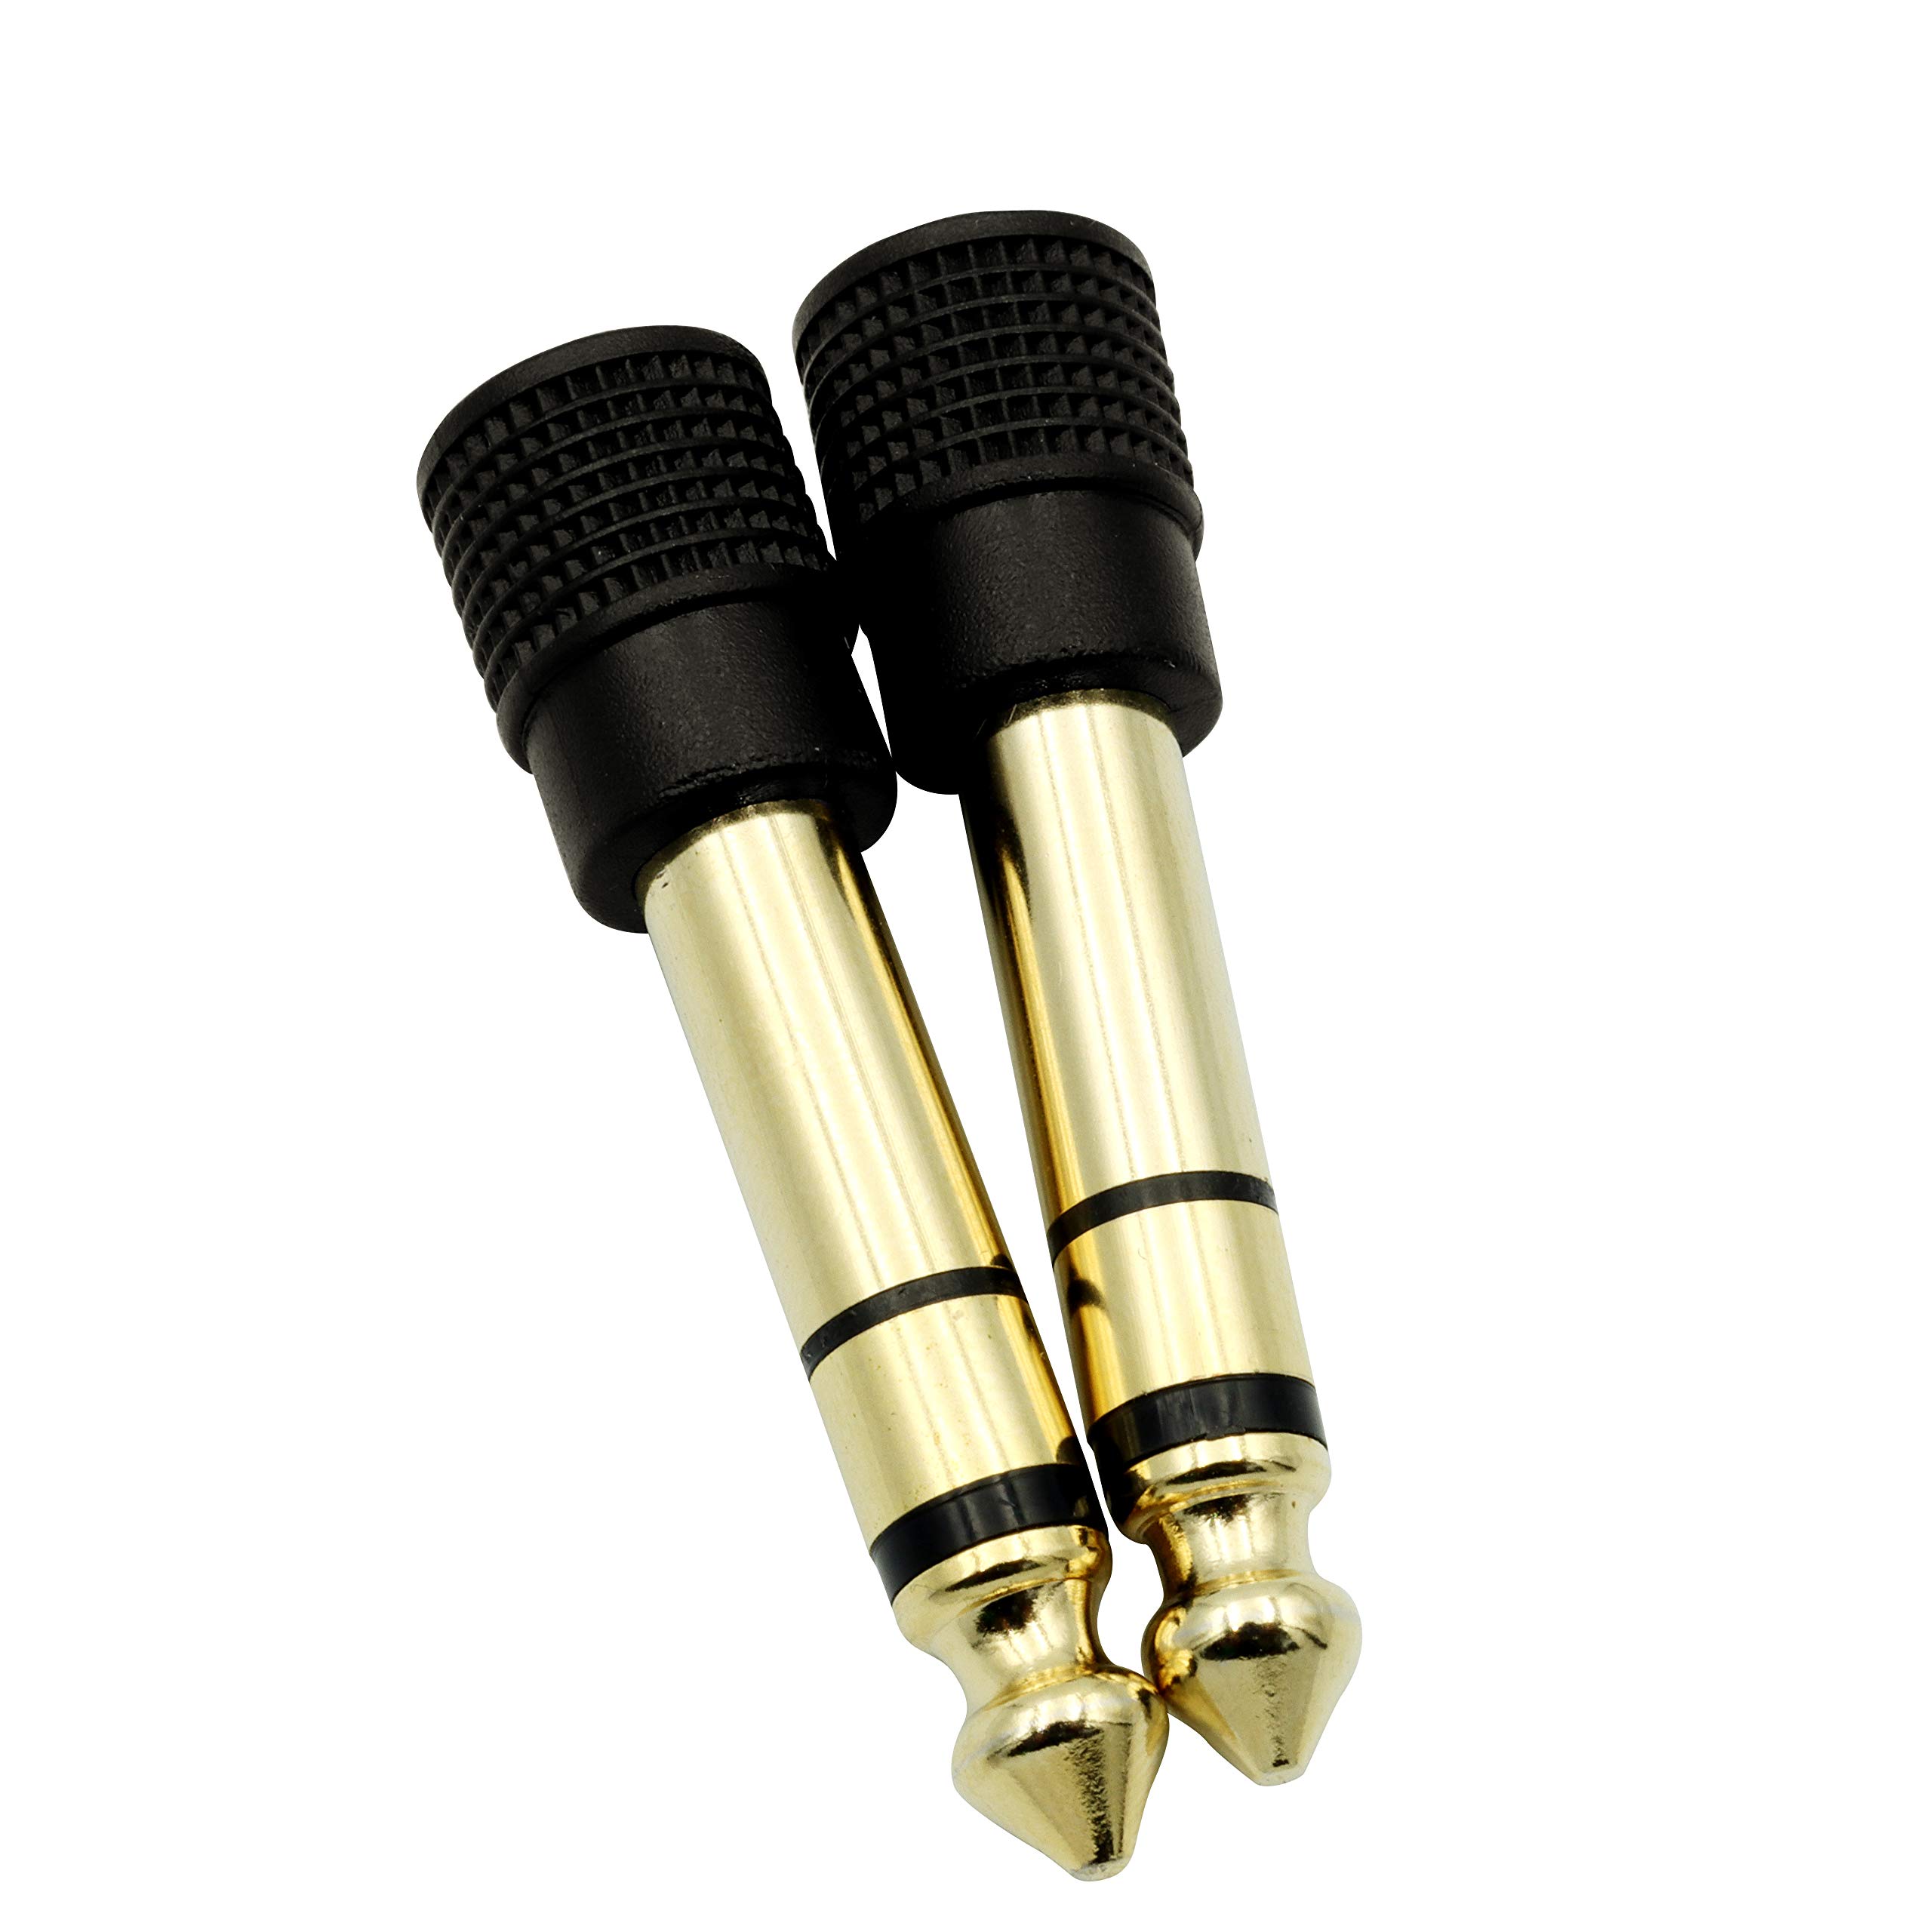 Chadou Audio Adapter 6.35mm (1/4 inch) Male to 3.5mm (1/8 inch) Female Stereo Headphone Connector Gold Plated, 2 Pack